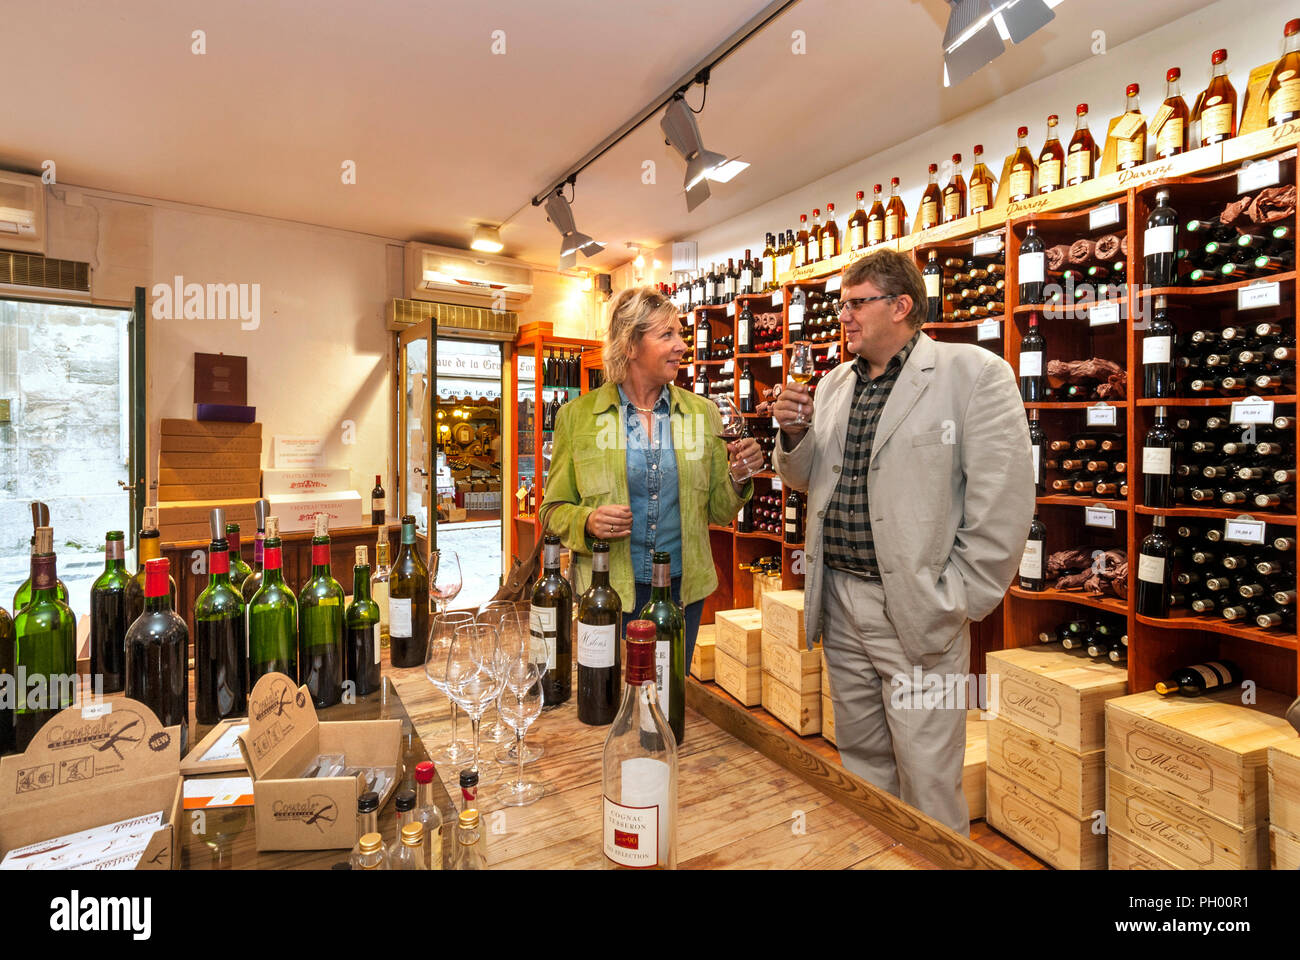 FINE WINE TASTING SHOP STORE Customers in 'Bordeaux Classique' wine shop tasting a selection of fine french wines on sale Saint Emilion ST-EMILION Gironde France Stock Photo